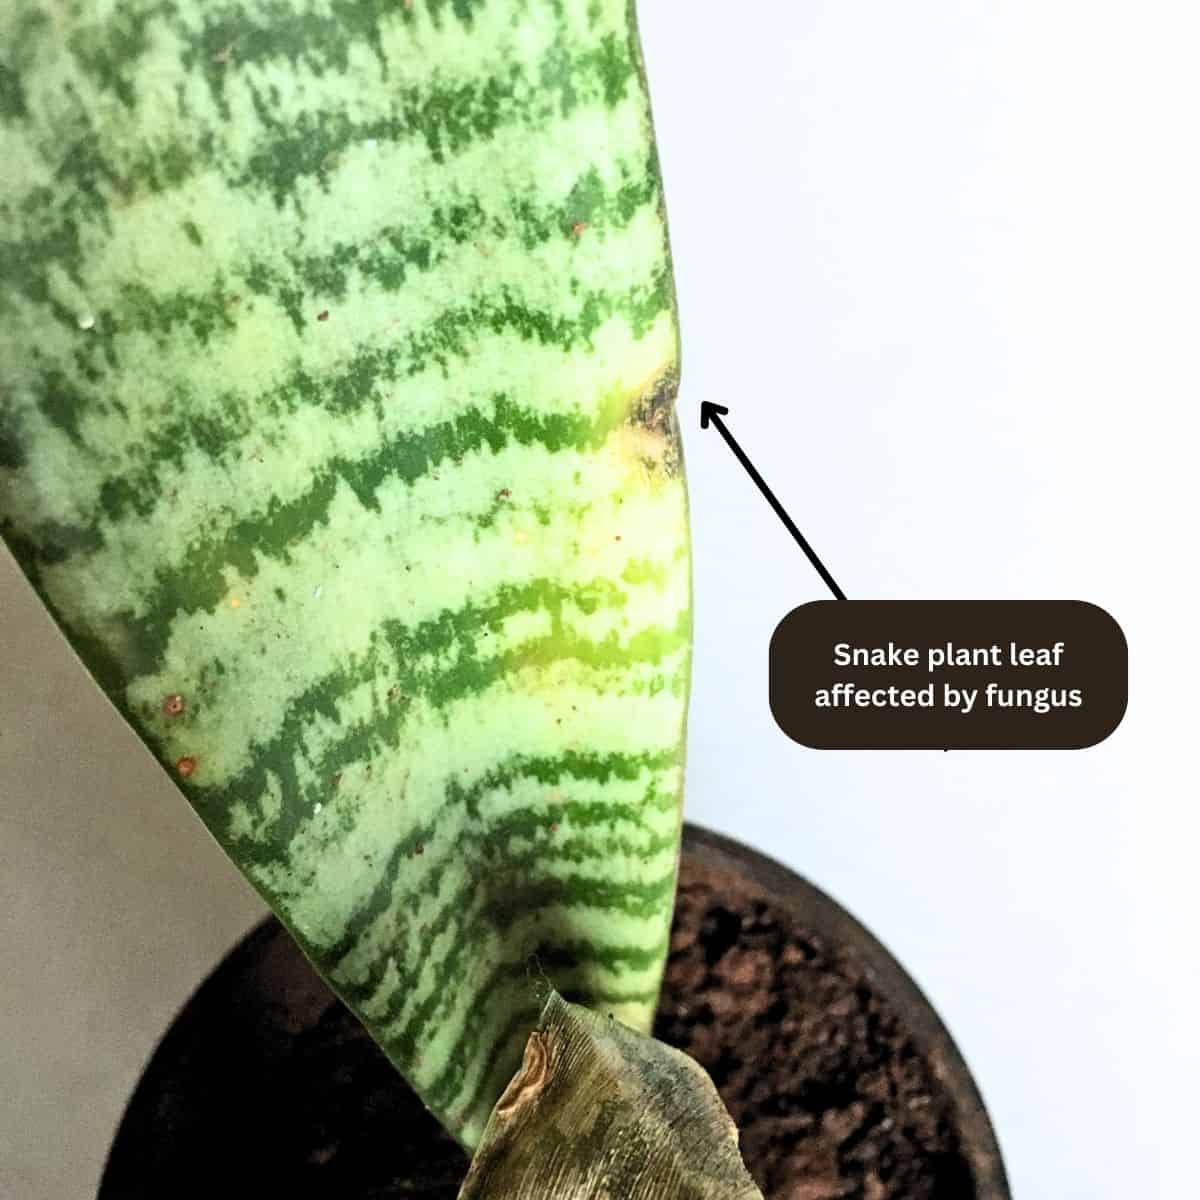 snake plant leaf affected by fungus